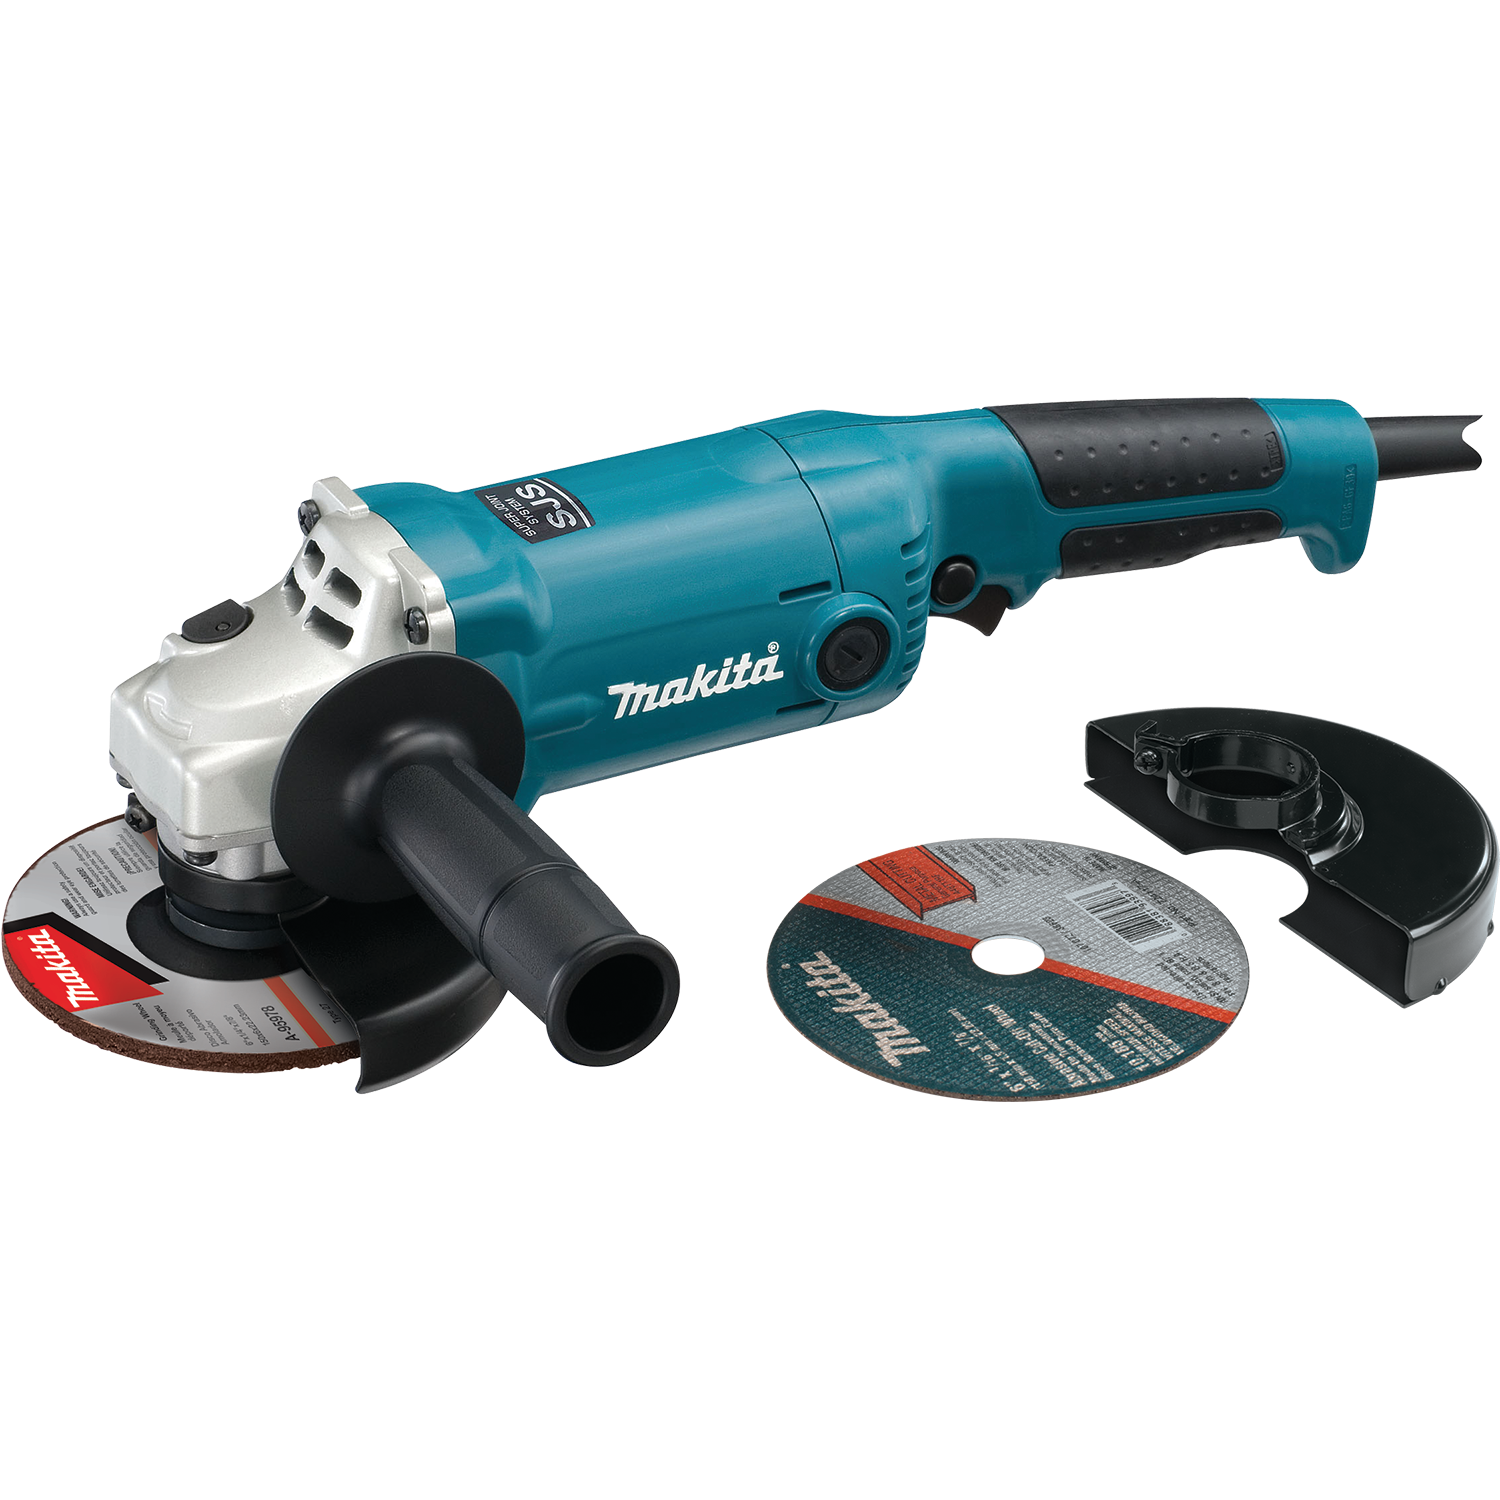 Makita - Makita 6 in. SJS? Cut-Off/Angle Grinder with AC/DC Switch